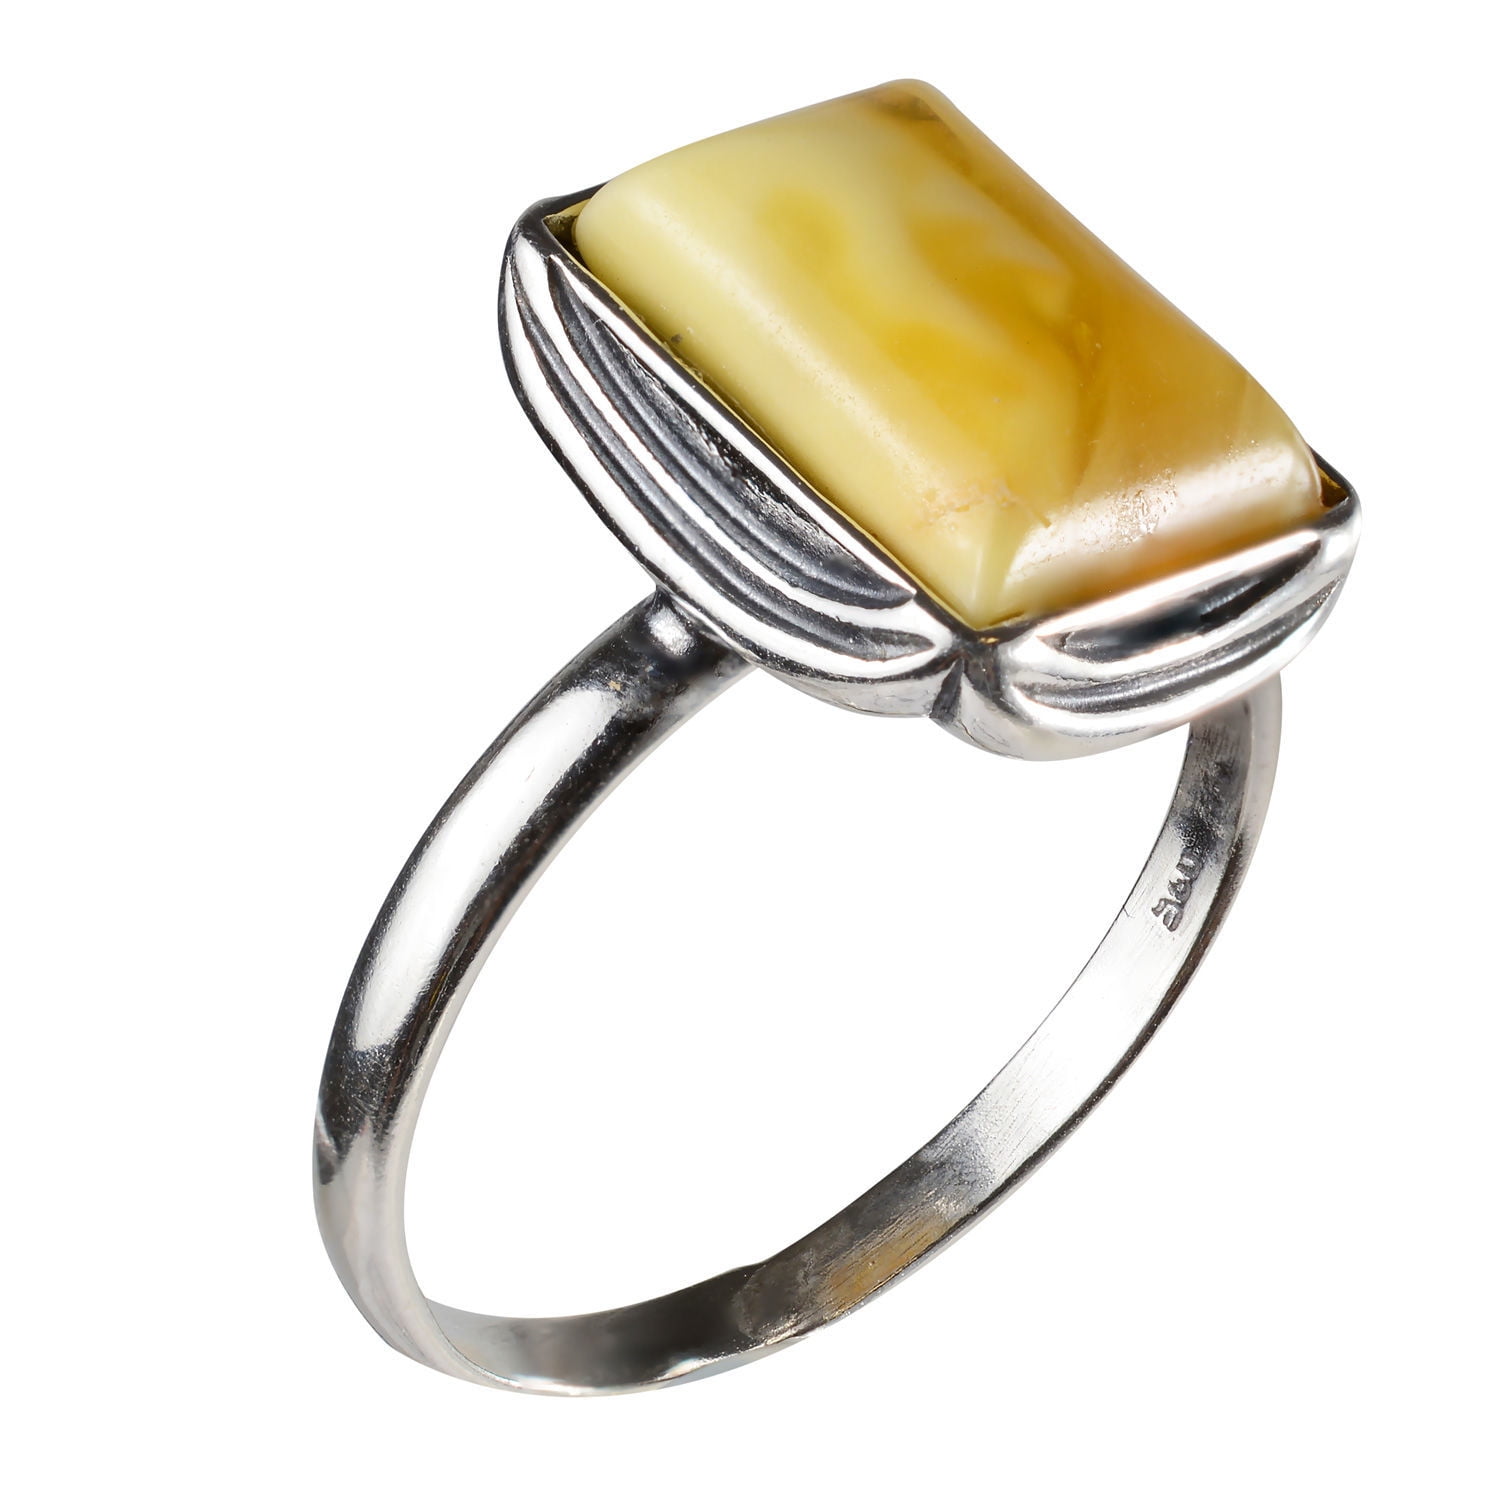 BALTIC BUTTERSCOTCH GREEN or HONEY AMBER & STERLING SILVER HANDMADE RING 